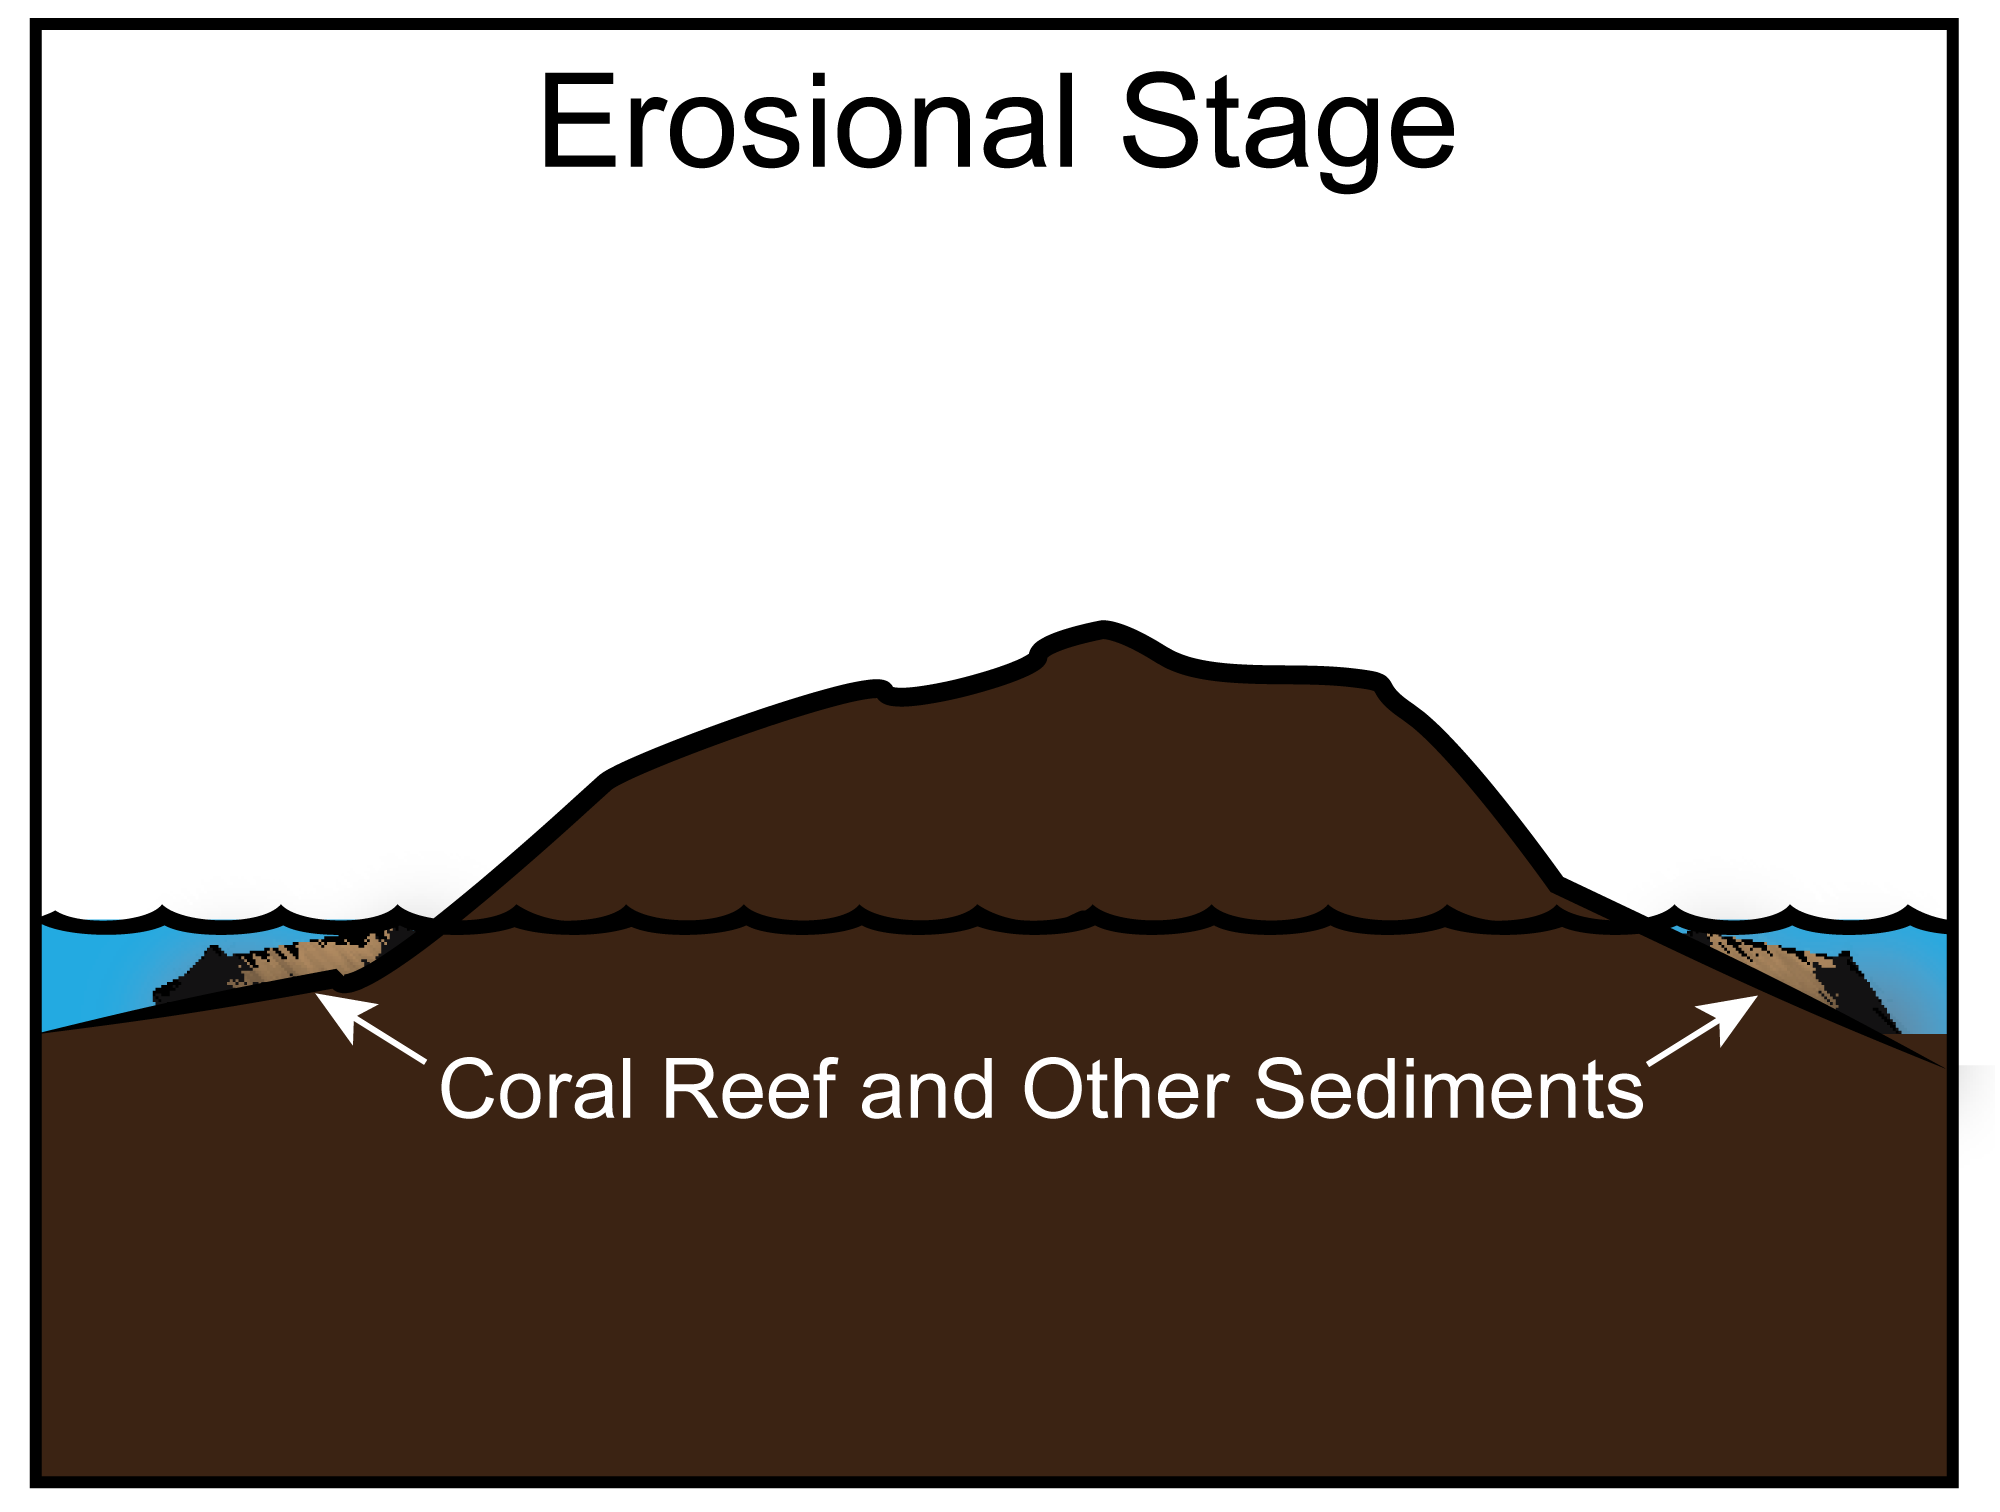 Diagram of the erosional stage of the volcanic island life cycle. In this image, the volcano is heavily eroded and is now much shorter than its maximum height. Coral reefs have begun to form in the water on its submerged slopes.